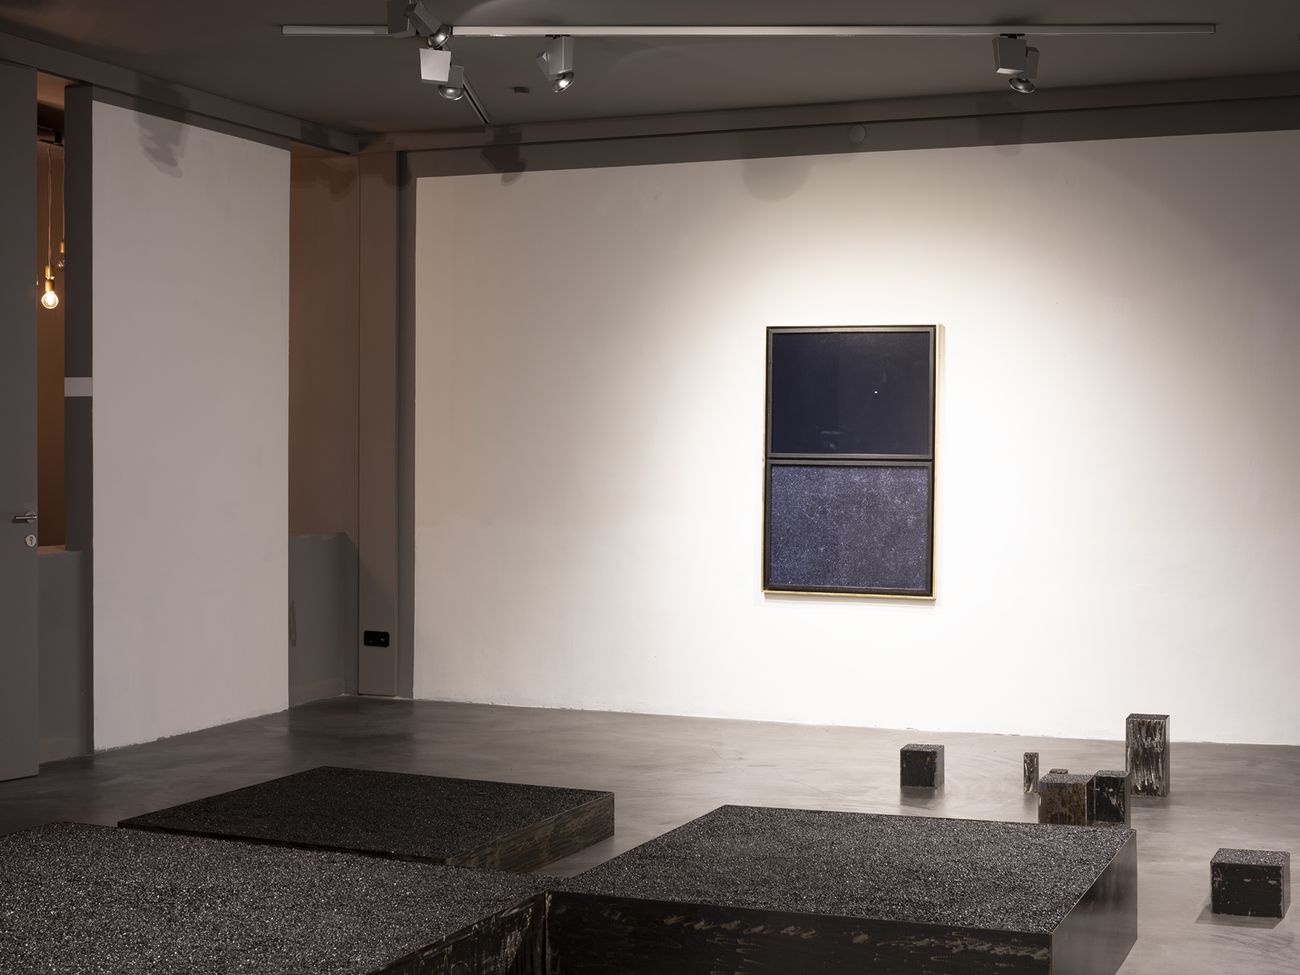 Antonio Ottomanelli. Specters of now. Installation view at Km0 Gallery, Innsbruck 2018